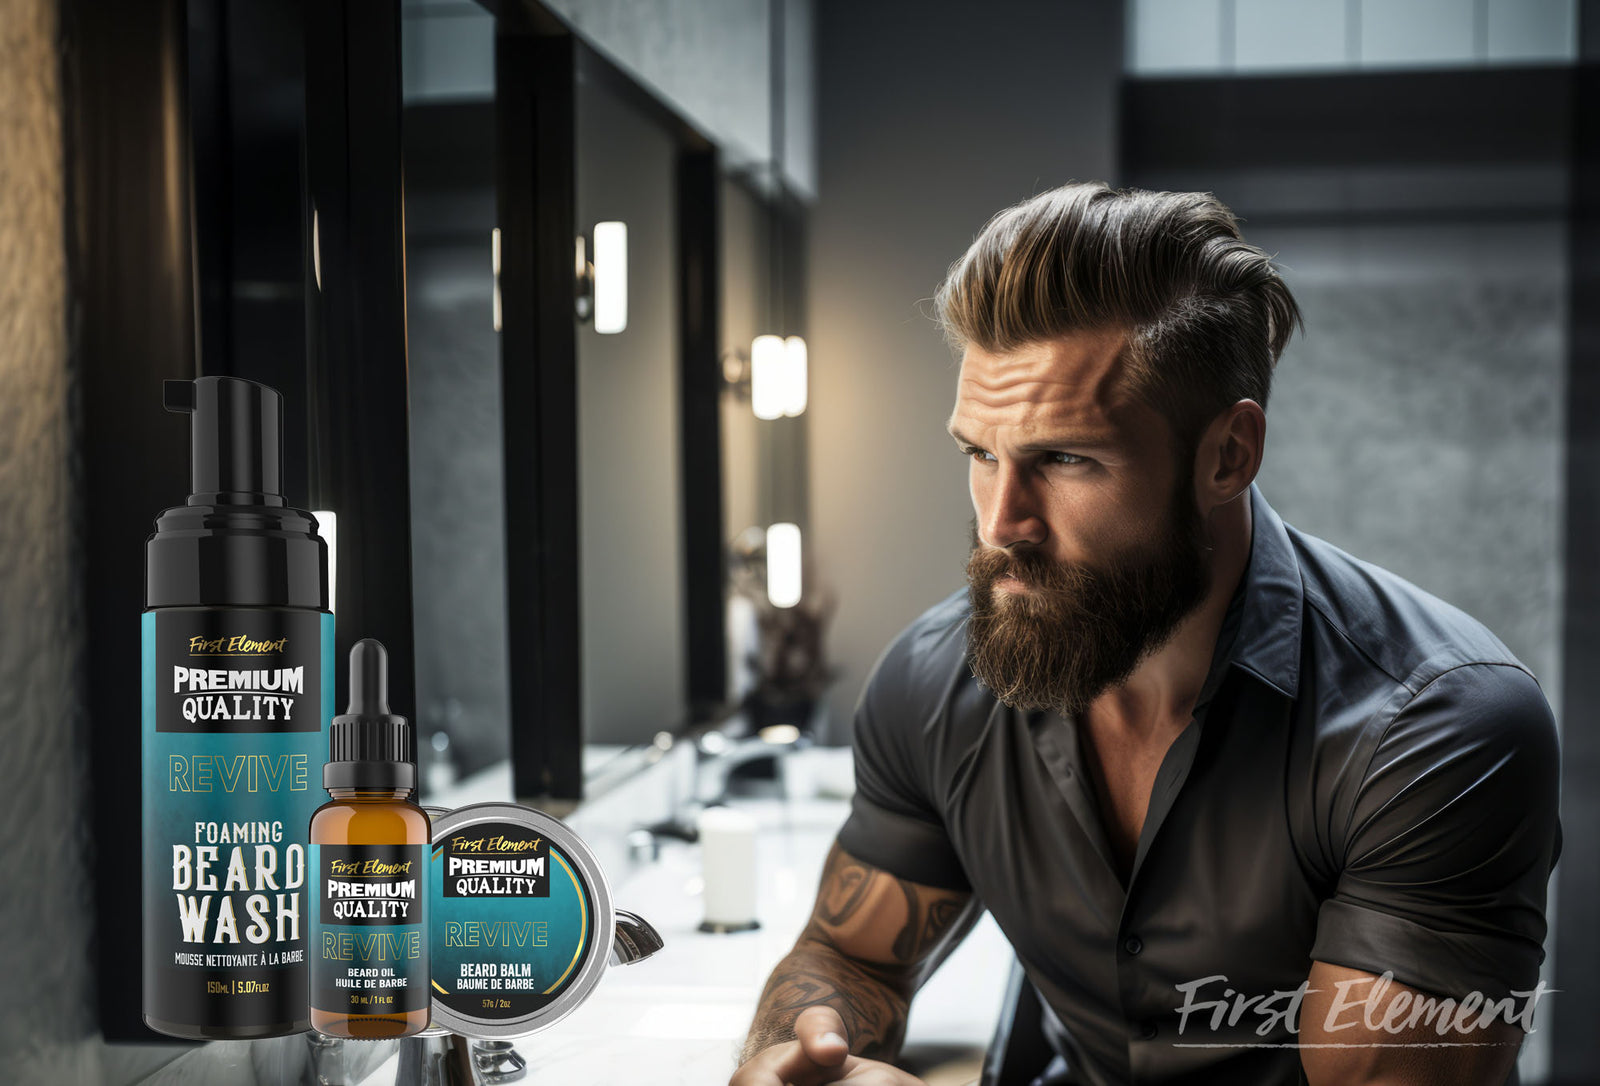 Attractive bearded man sitting at a sink and looking into a mirror. Trendy hair style and well kept beard.